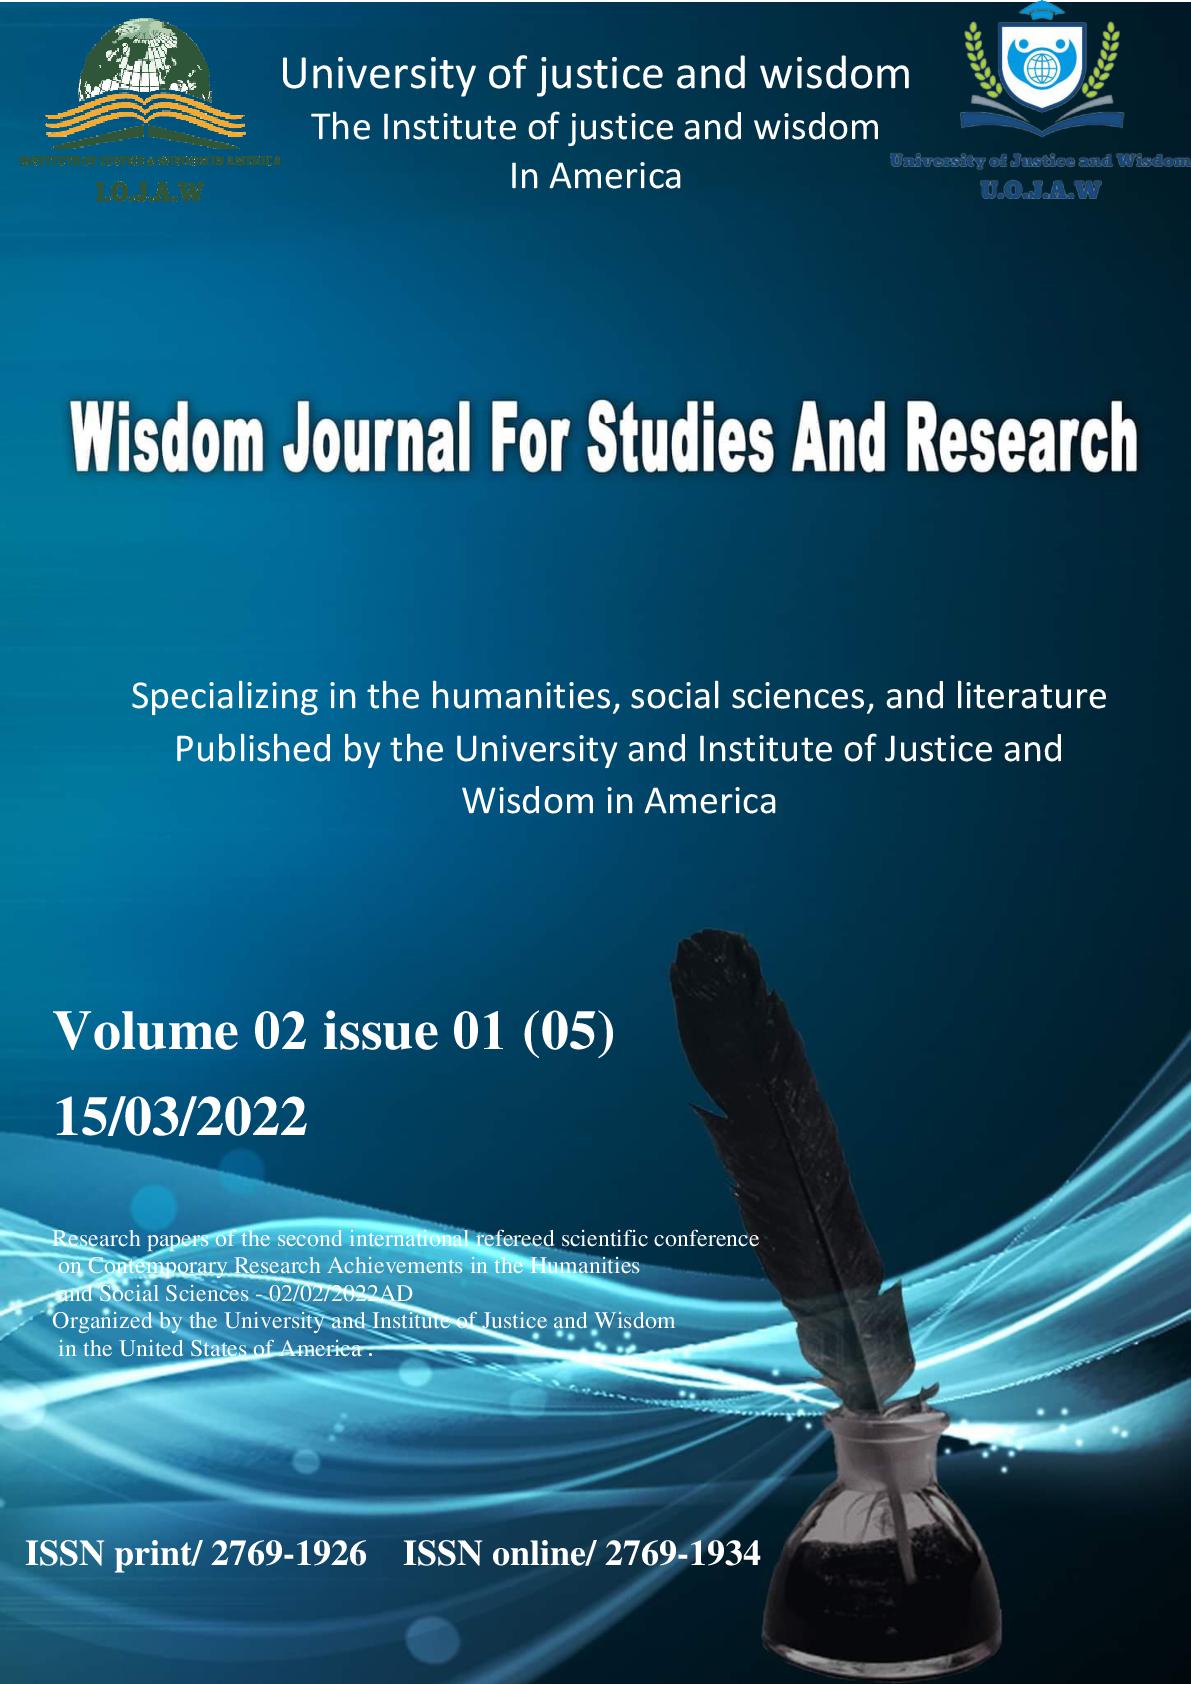 					View Vol. 2 No. 01 (2022): Wisdom Journal For Studies & Research  v2 n1
				